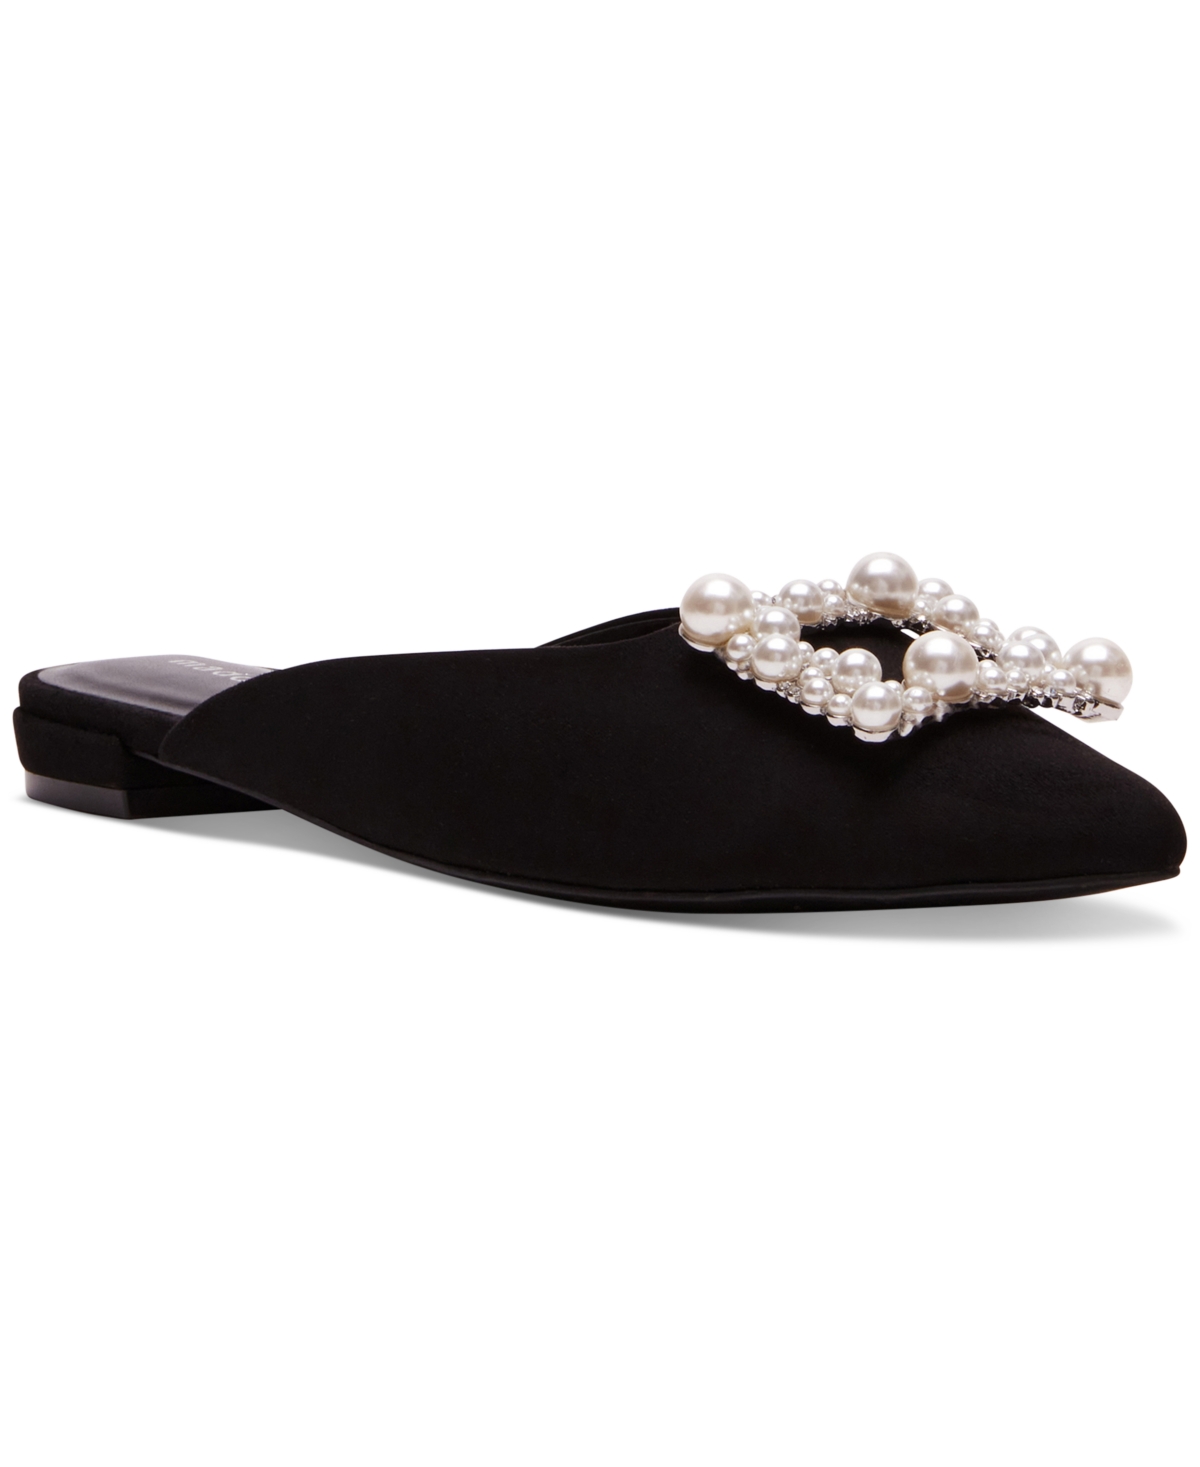 Ditzy Embellished Pointed-Toe Flat Mules - Black